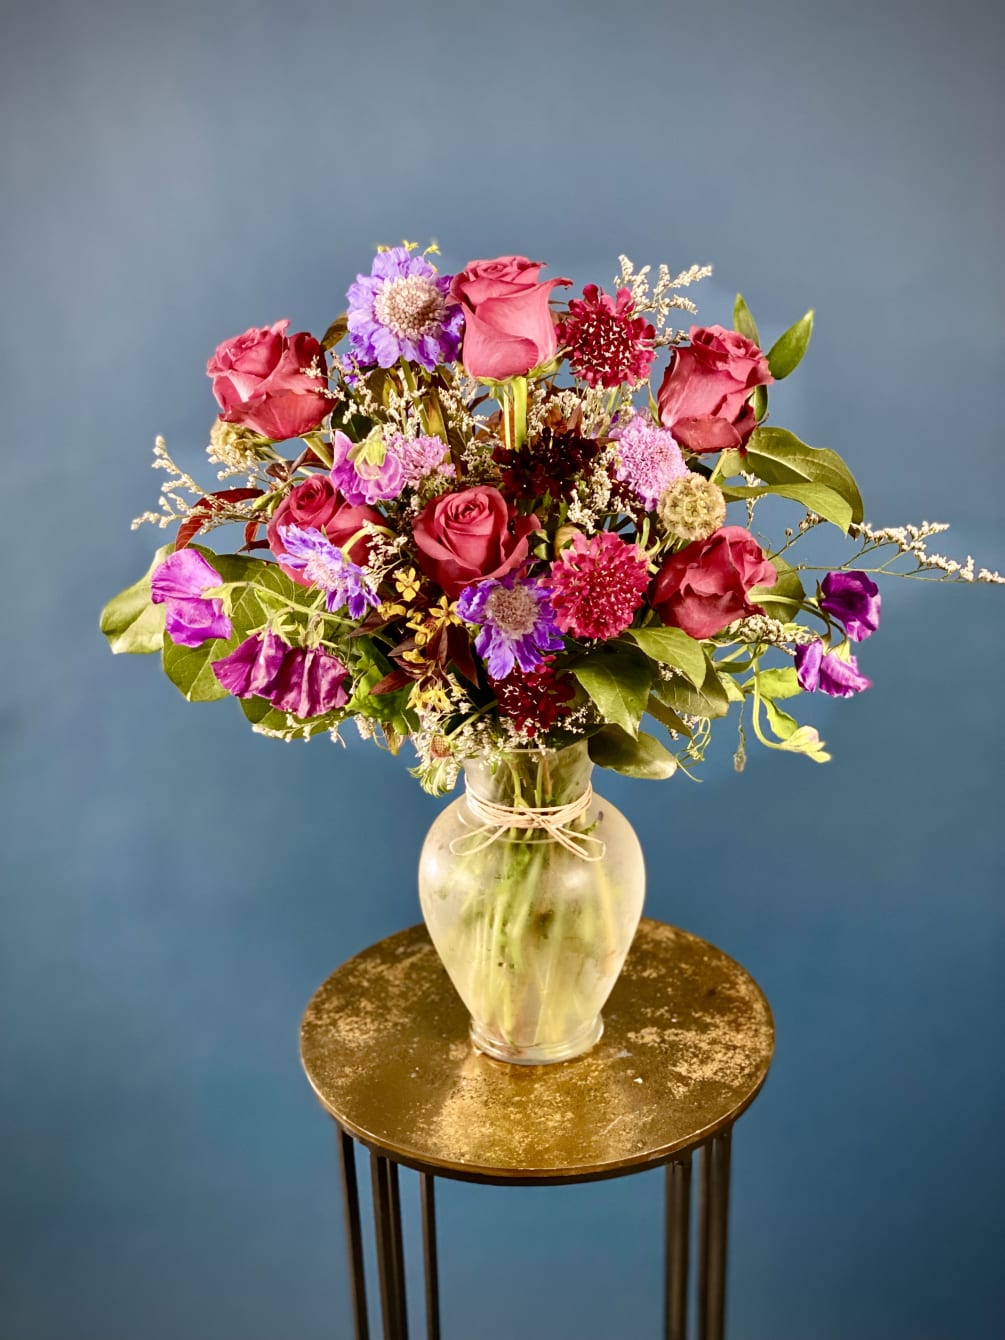 This Bouquet features the best of Portland. Showcasing the best local seasonal